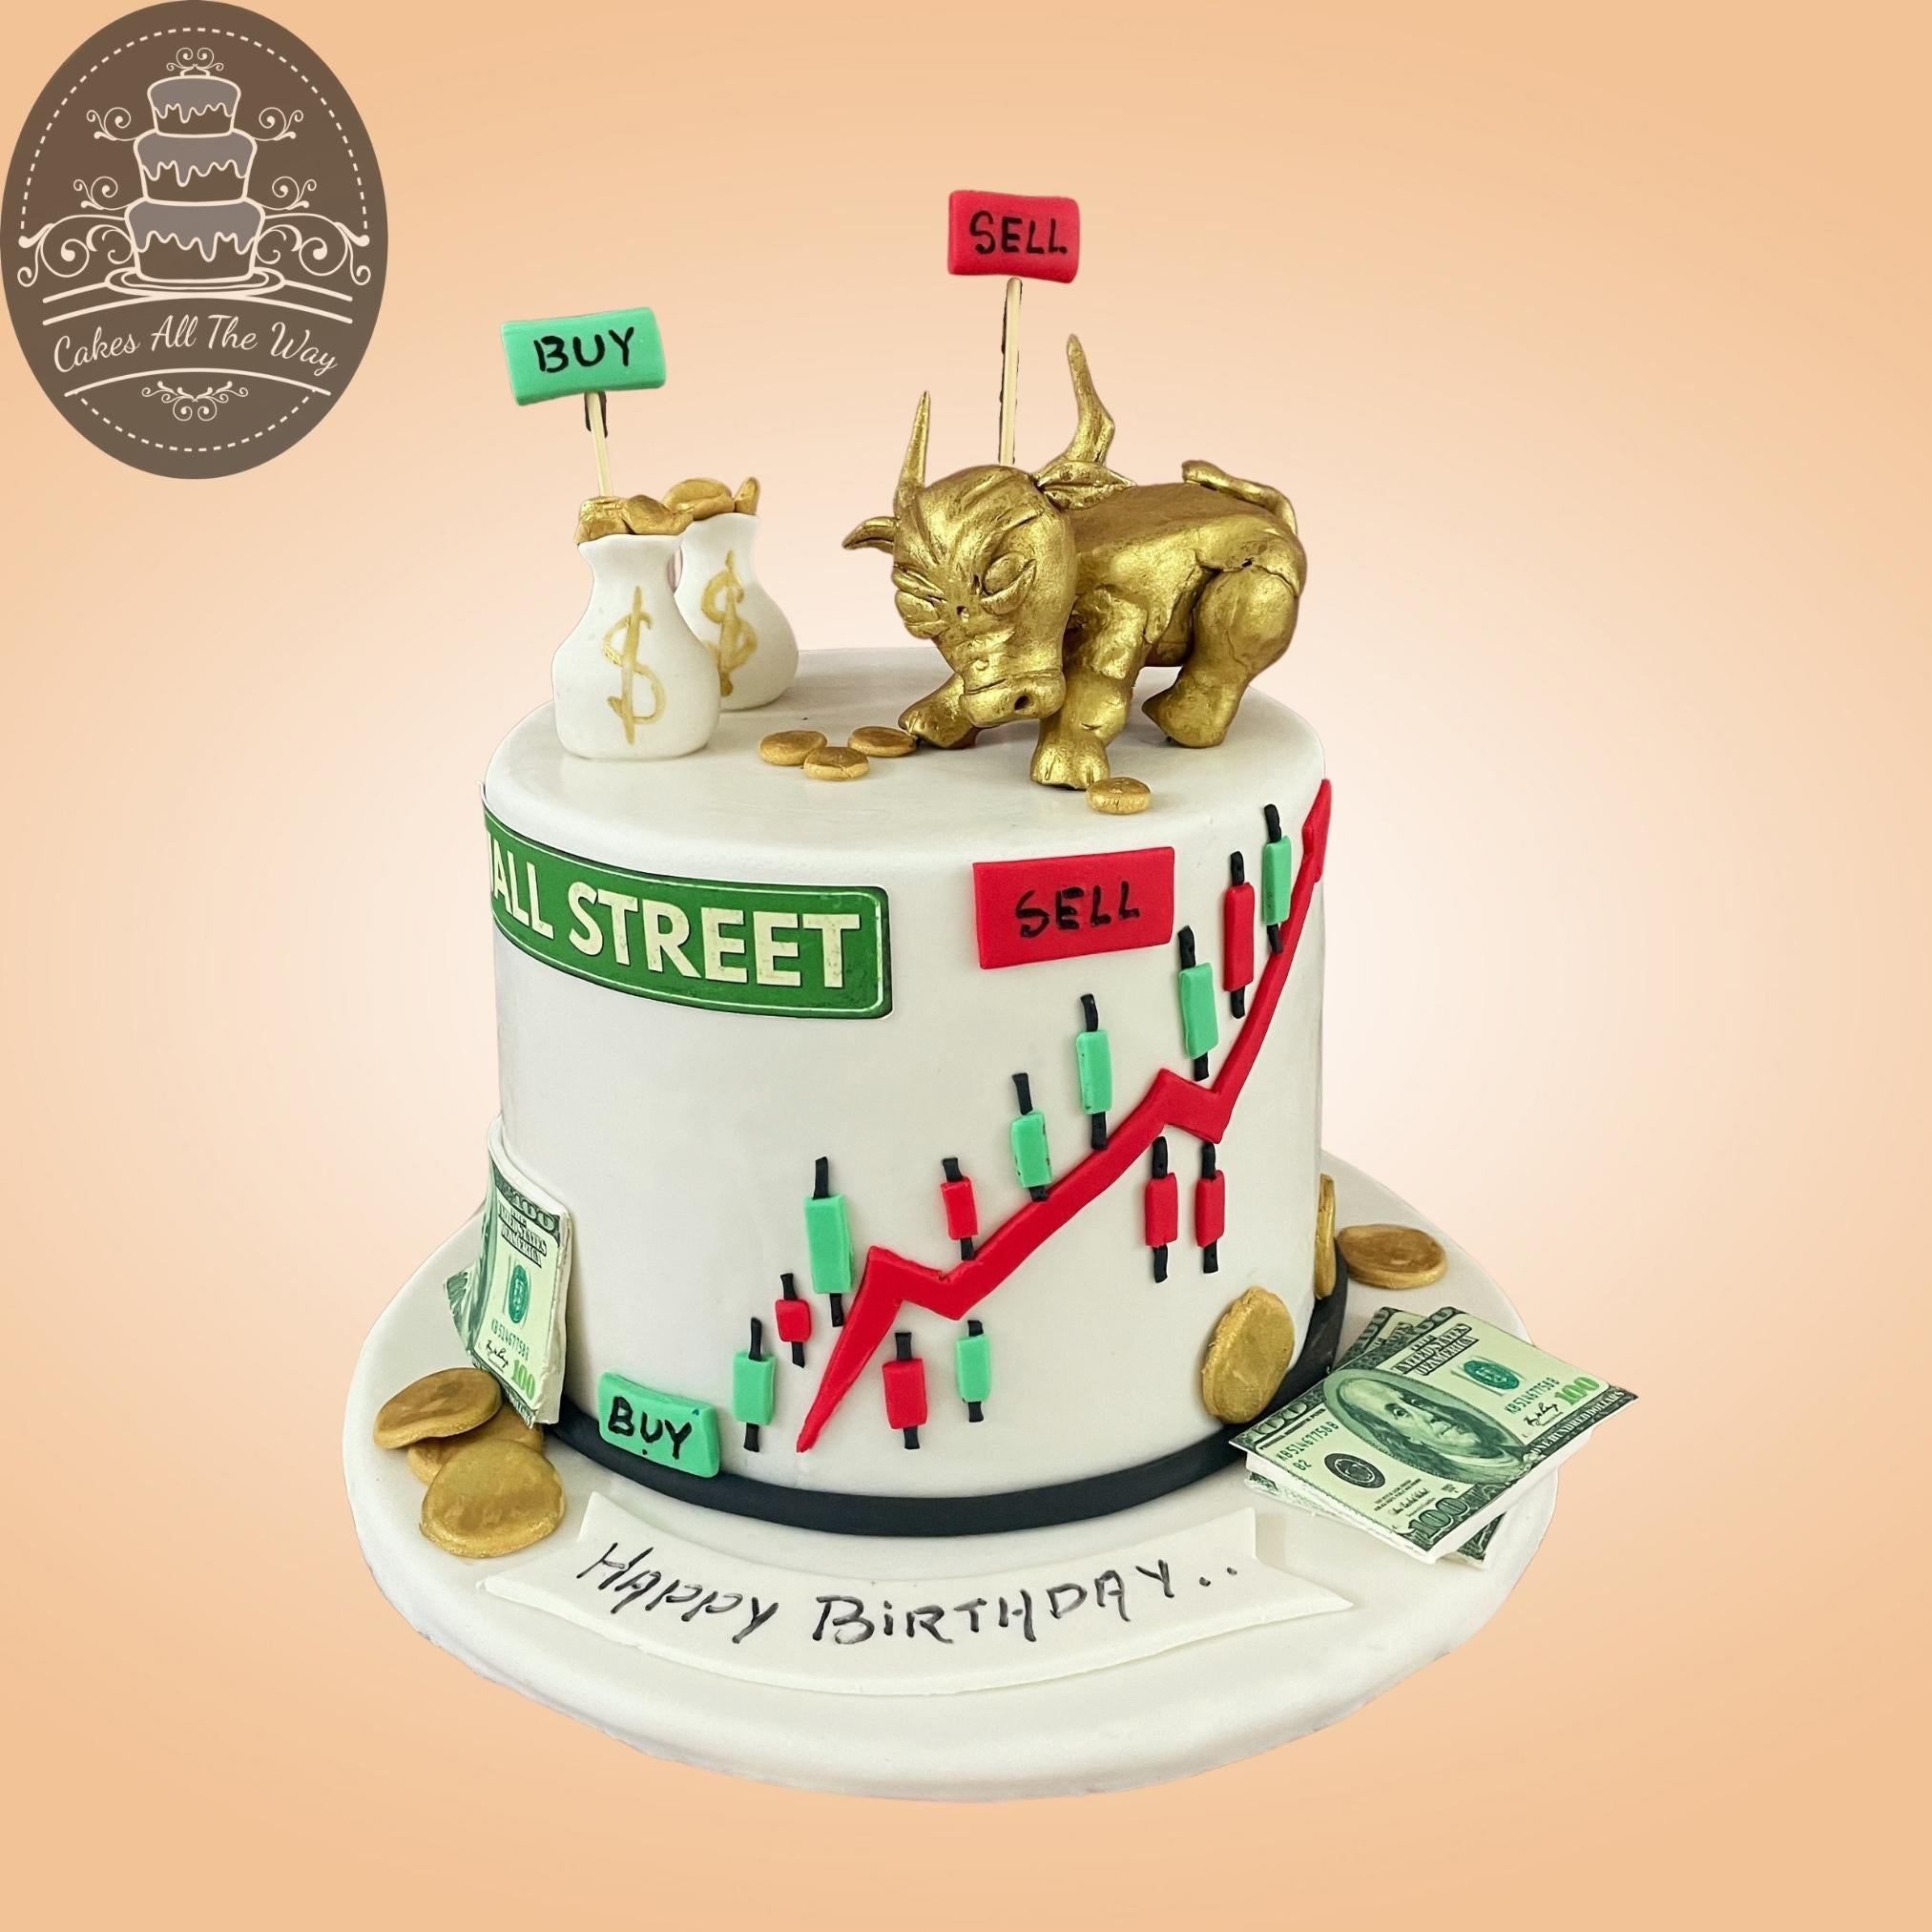 Stock Market Theme Cake for Husband by Creme Castle